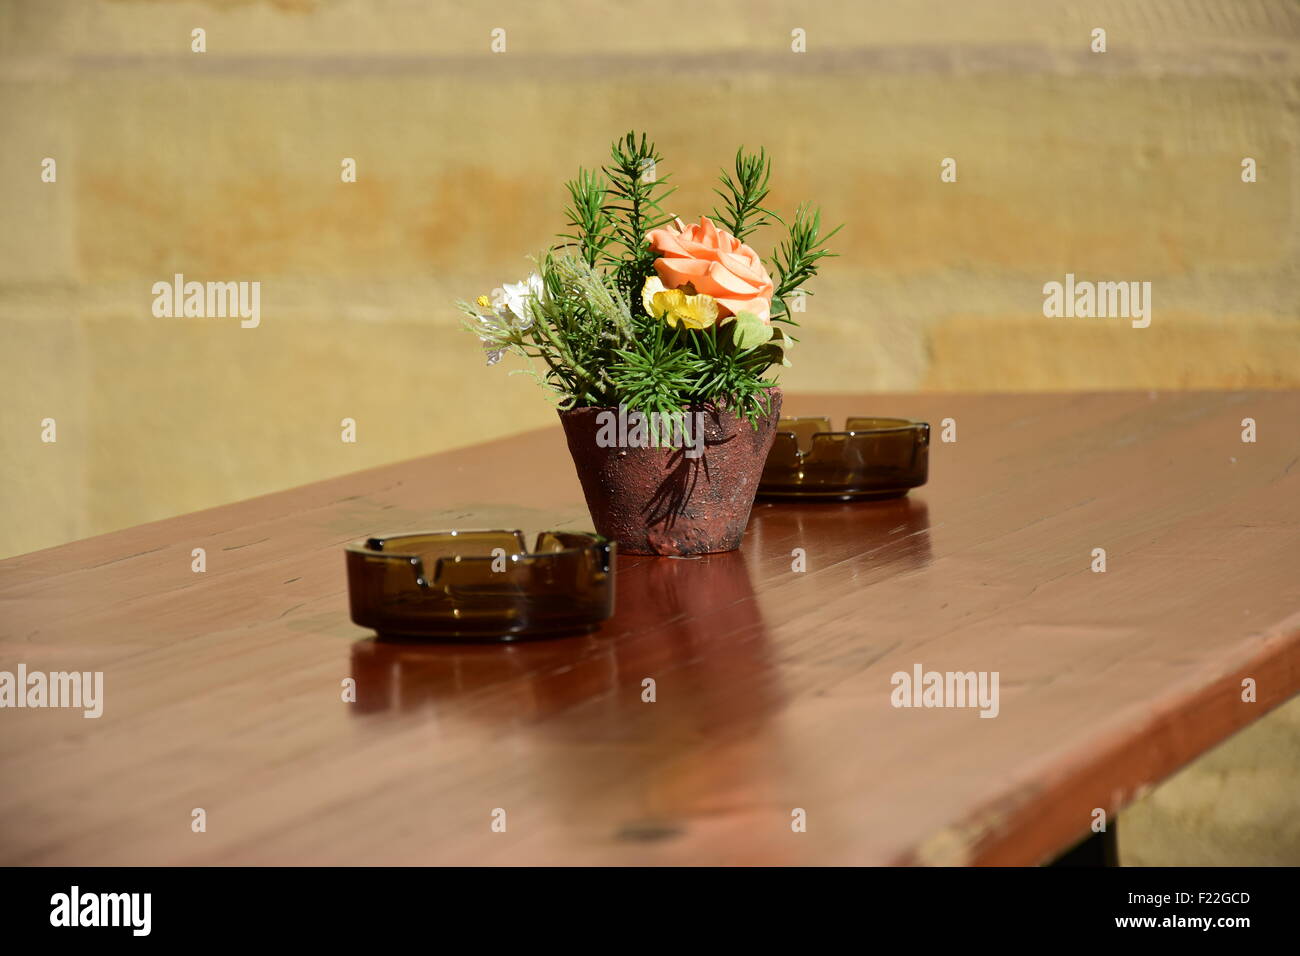 street cafe table decorated with flower pot and ashtrays Stock Photo